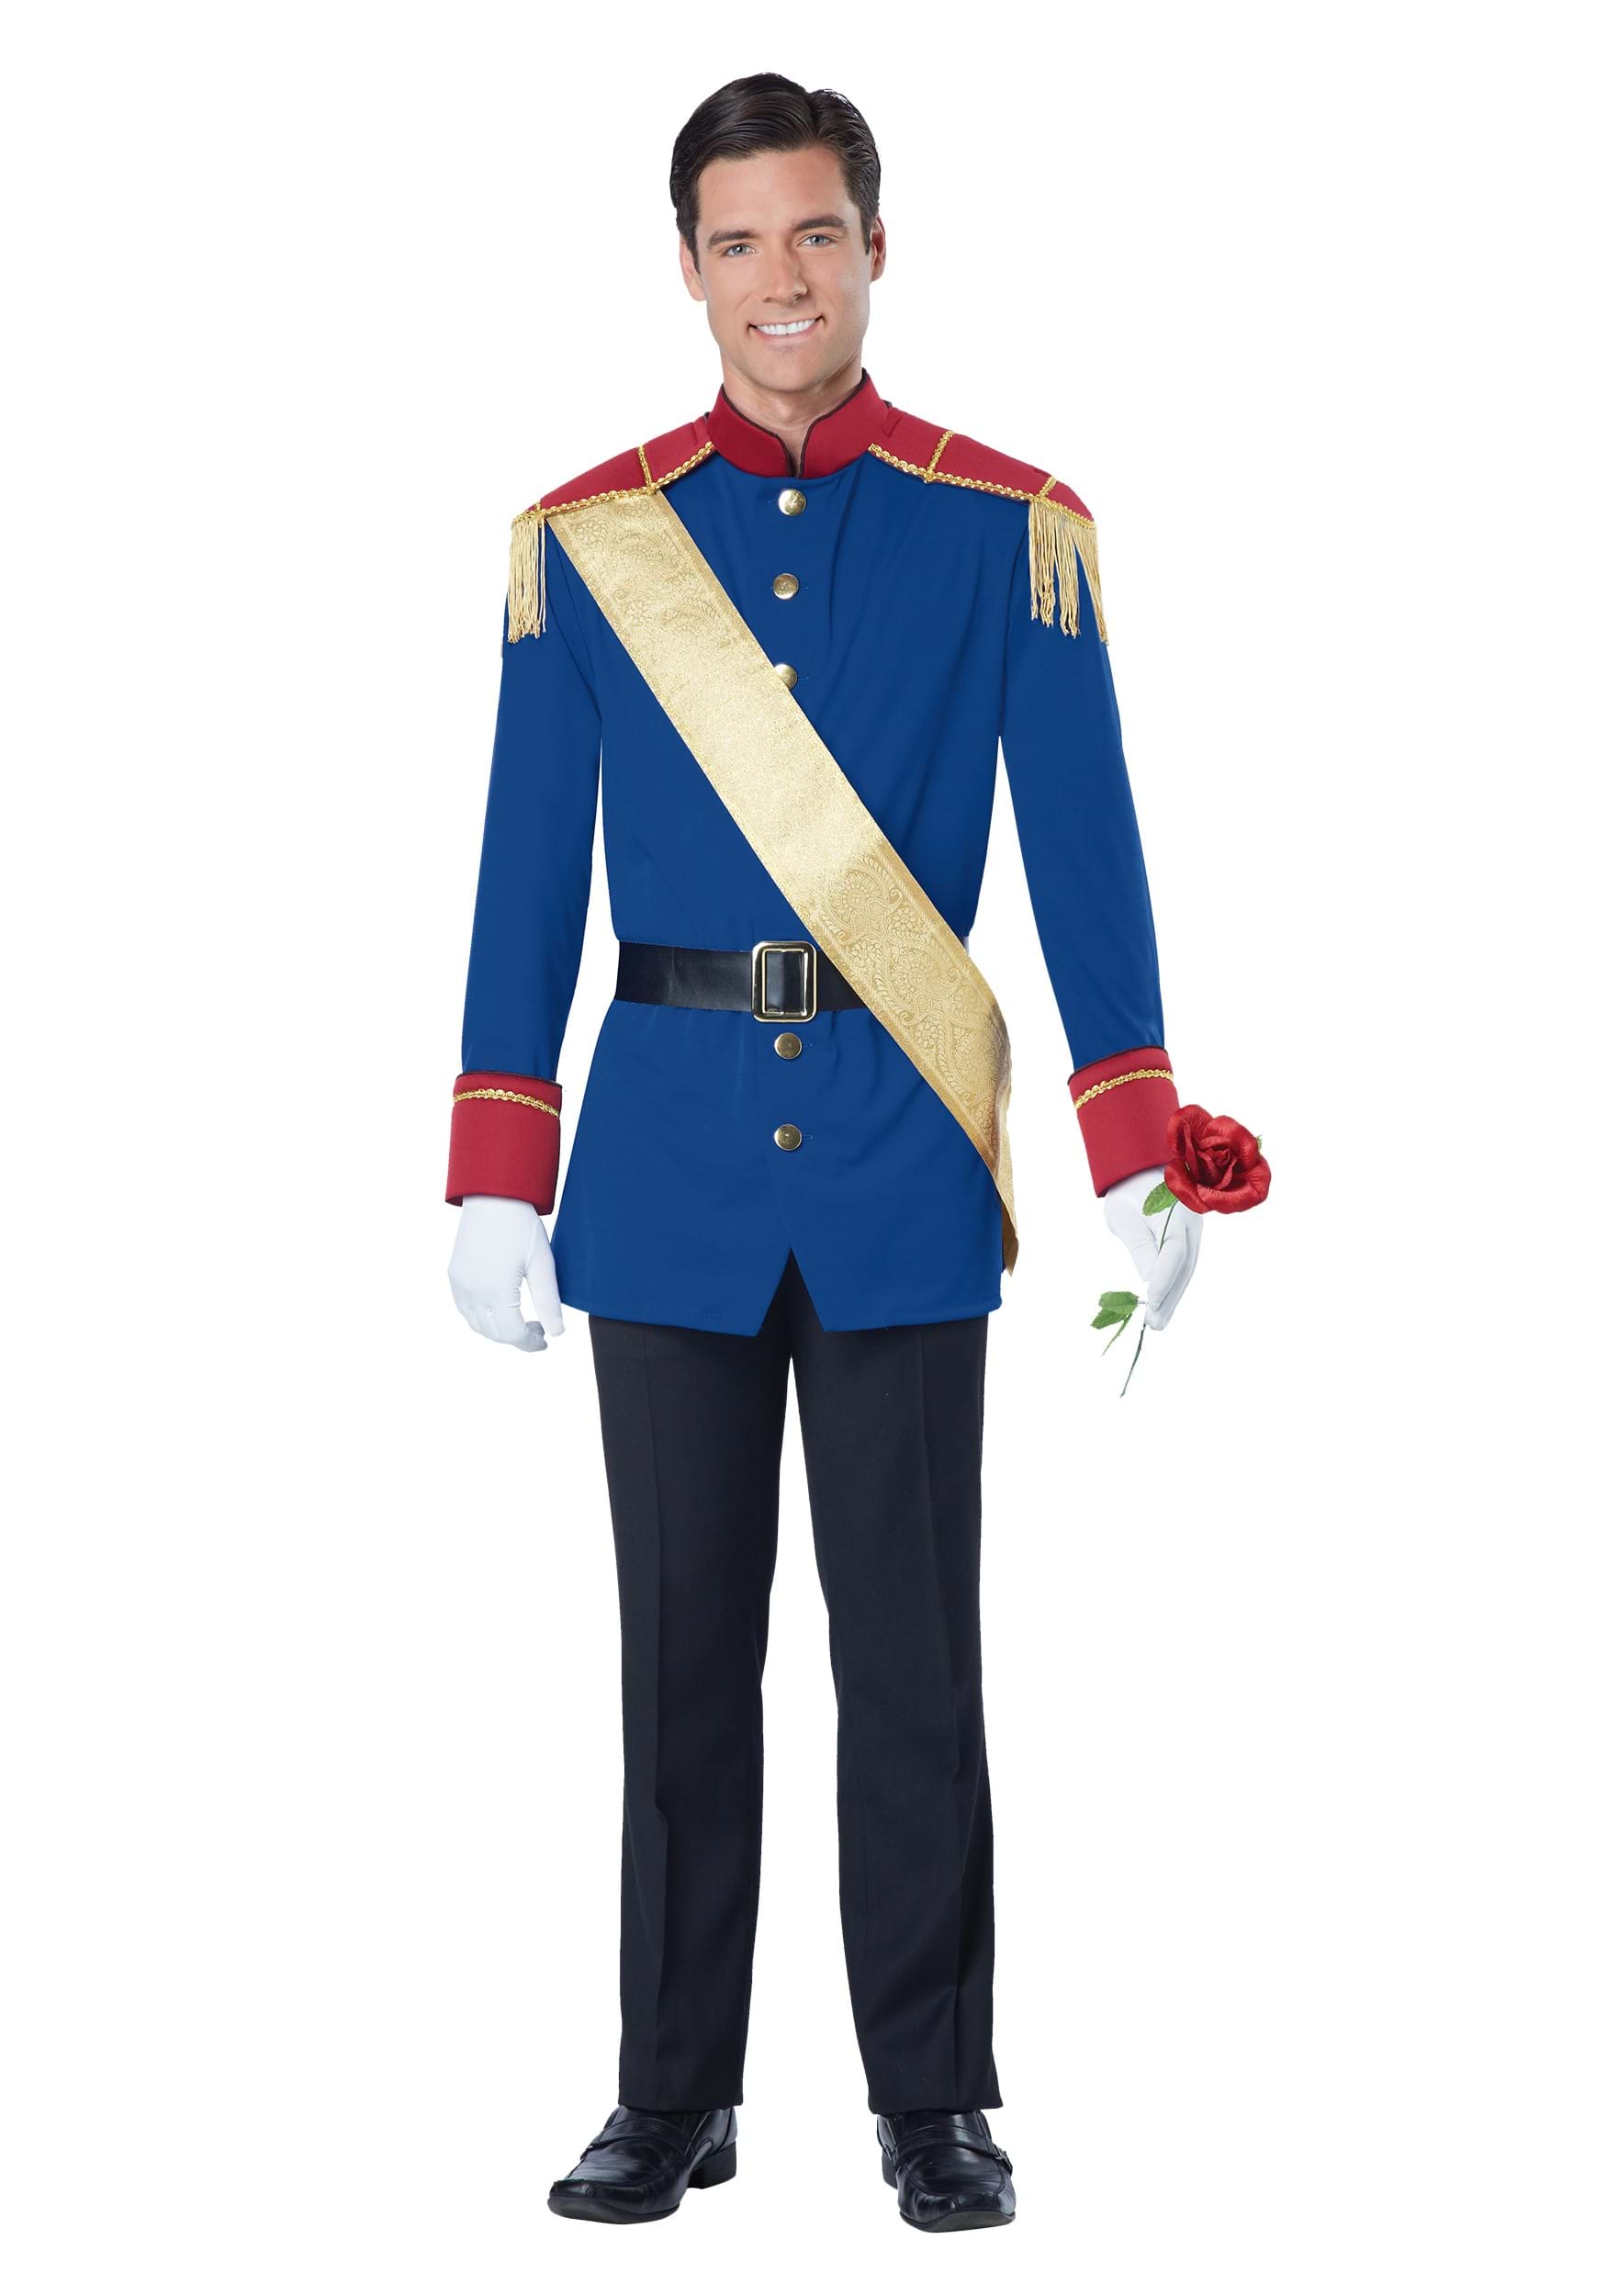 Photos - Fancy Dress California Costume Collection Storybook Prince Costume for Men Red/Blu 